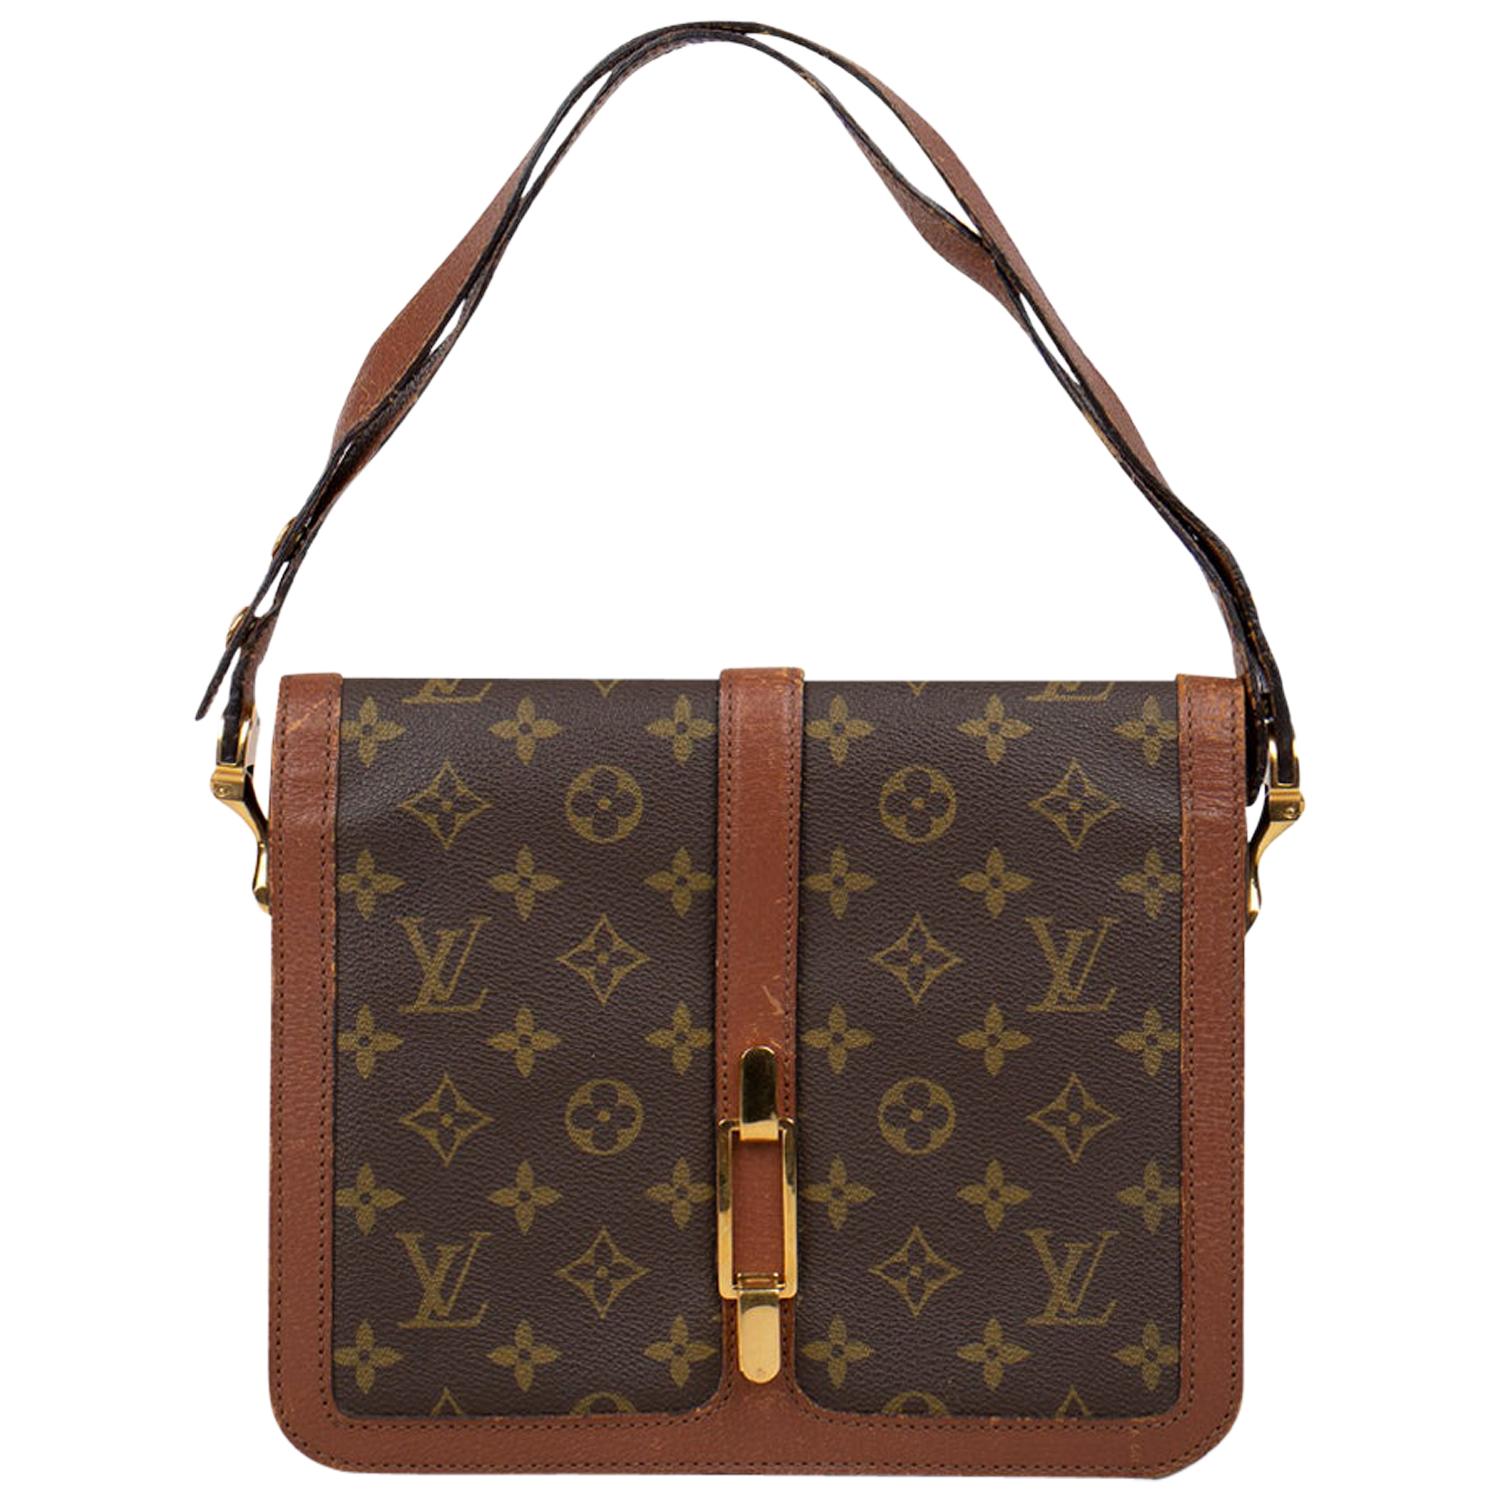 Louis Vuitton Heart Bag - 18 For Sale on 1stDibs